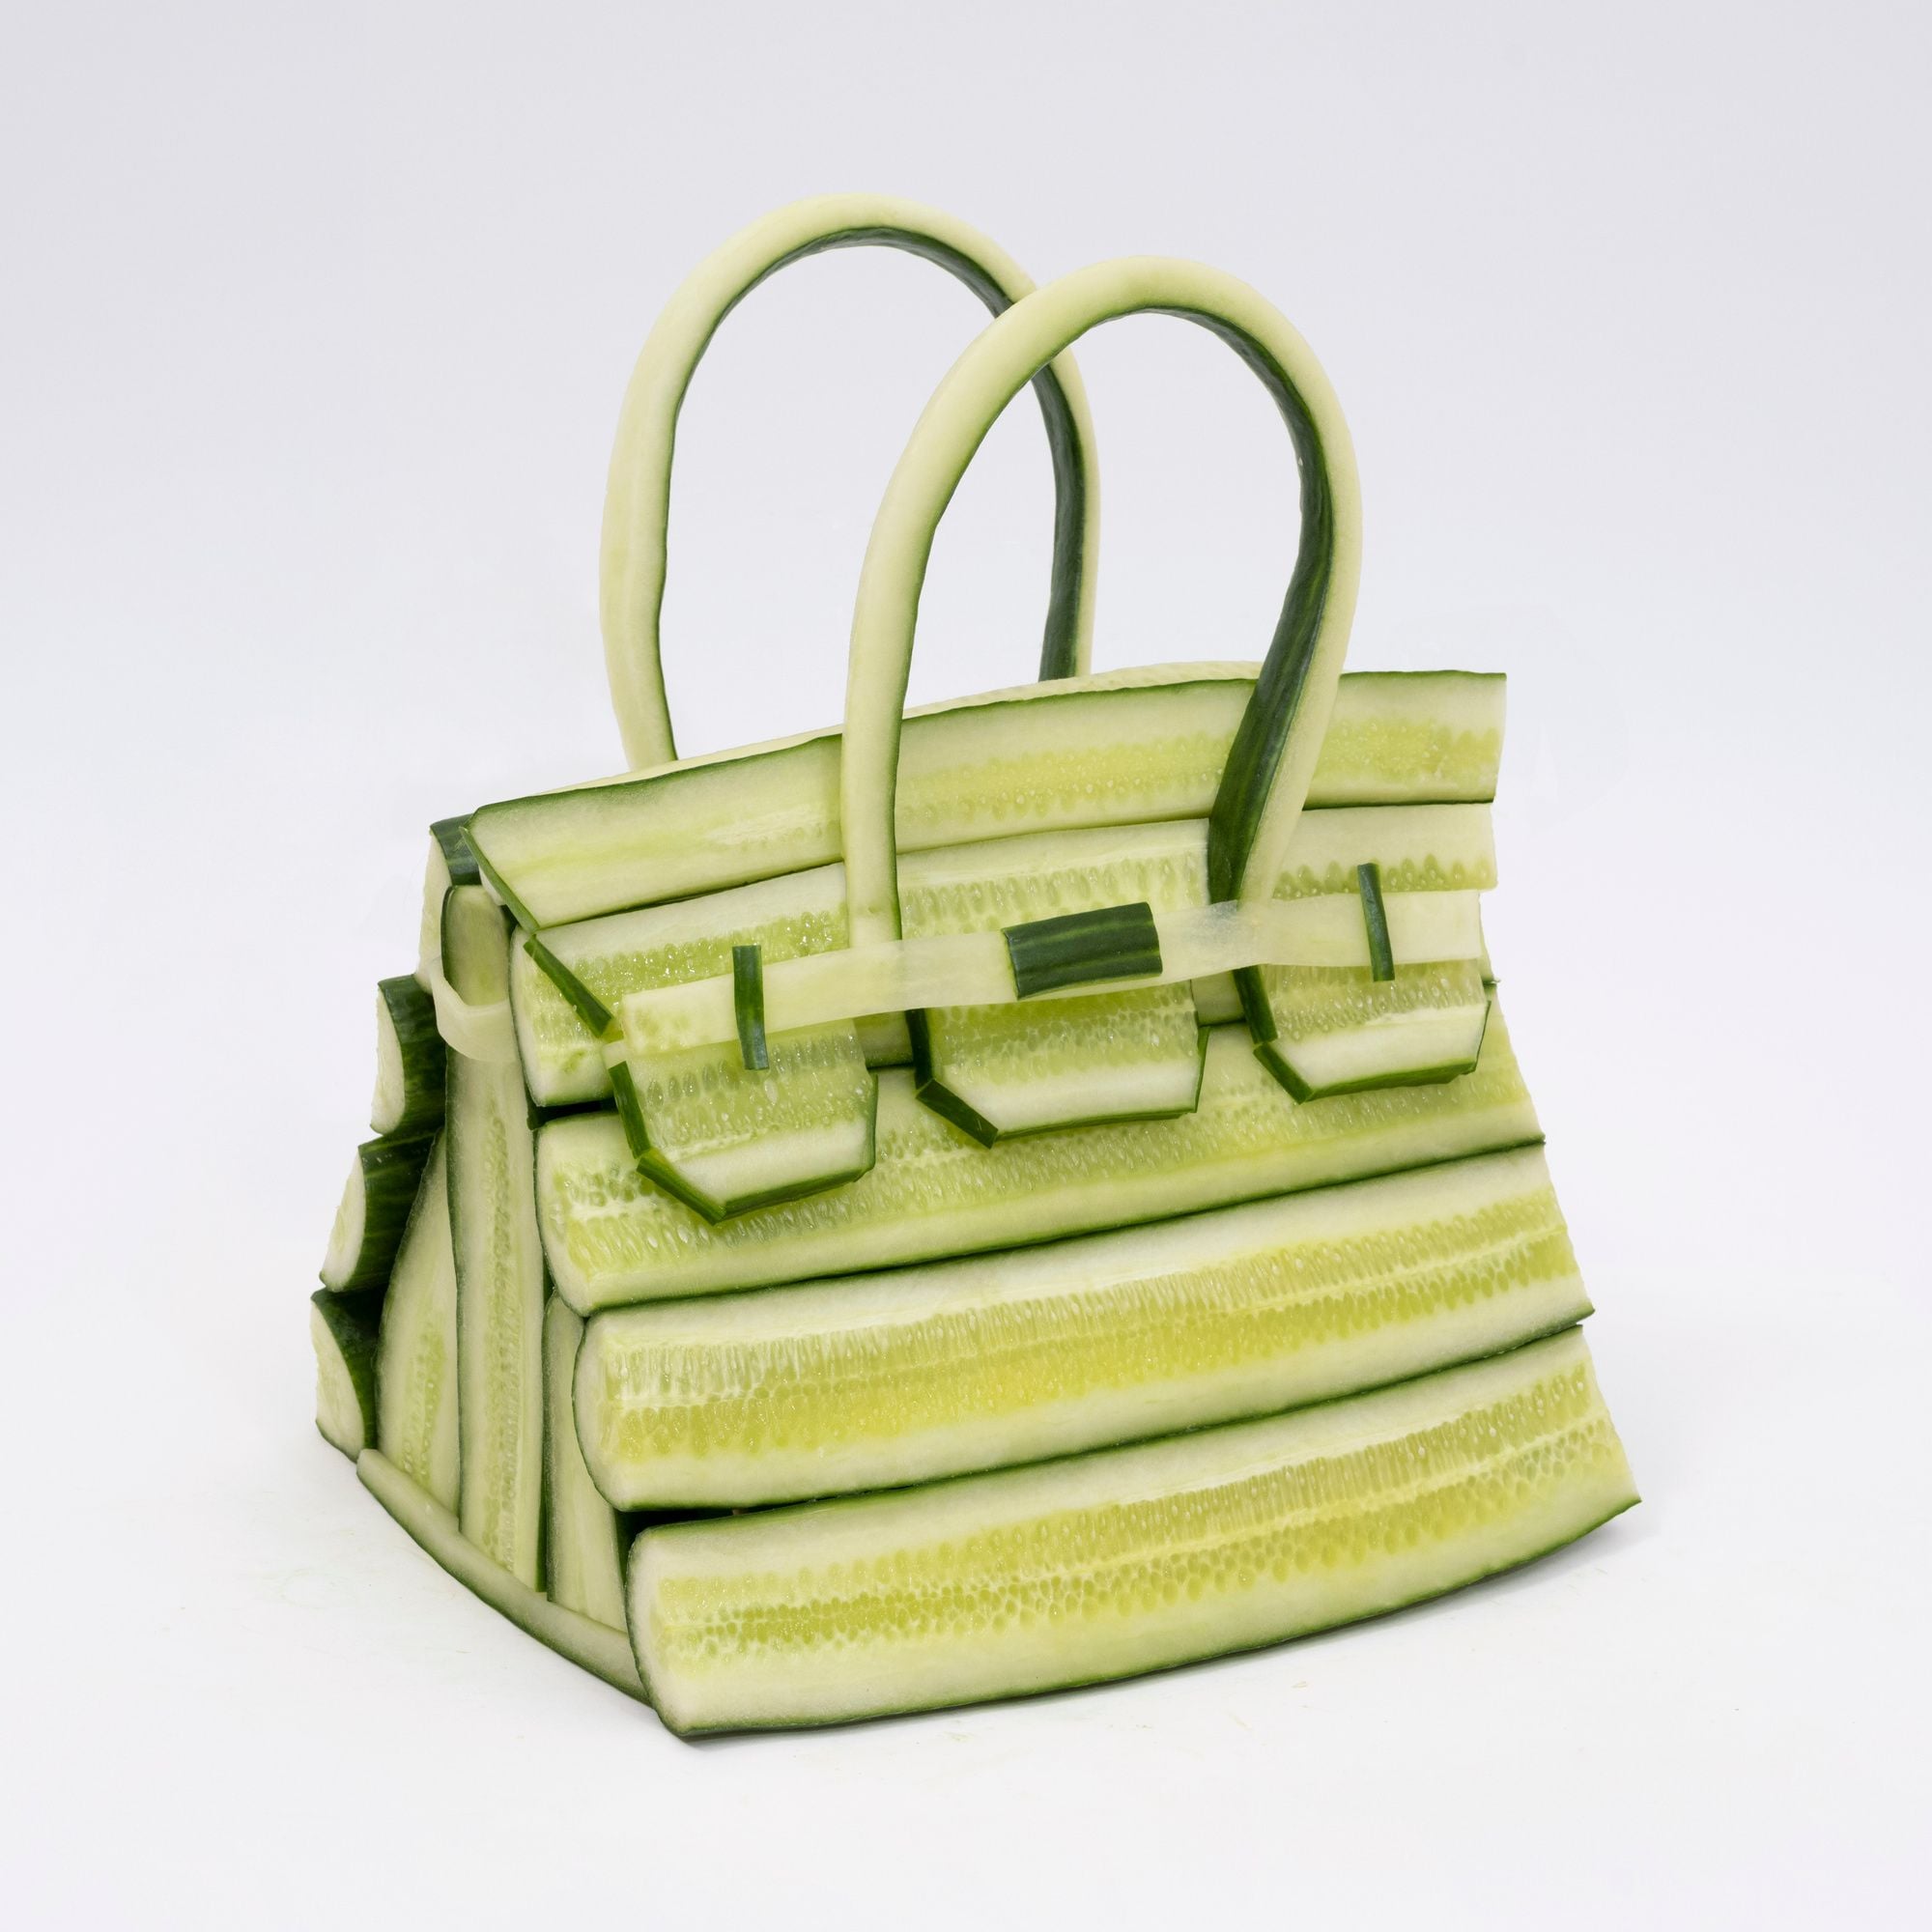 An all-cucumber version of luxury fashion brand Hermes' iconic 